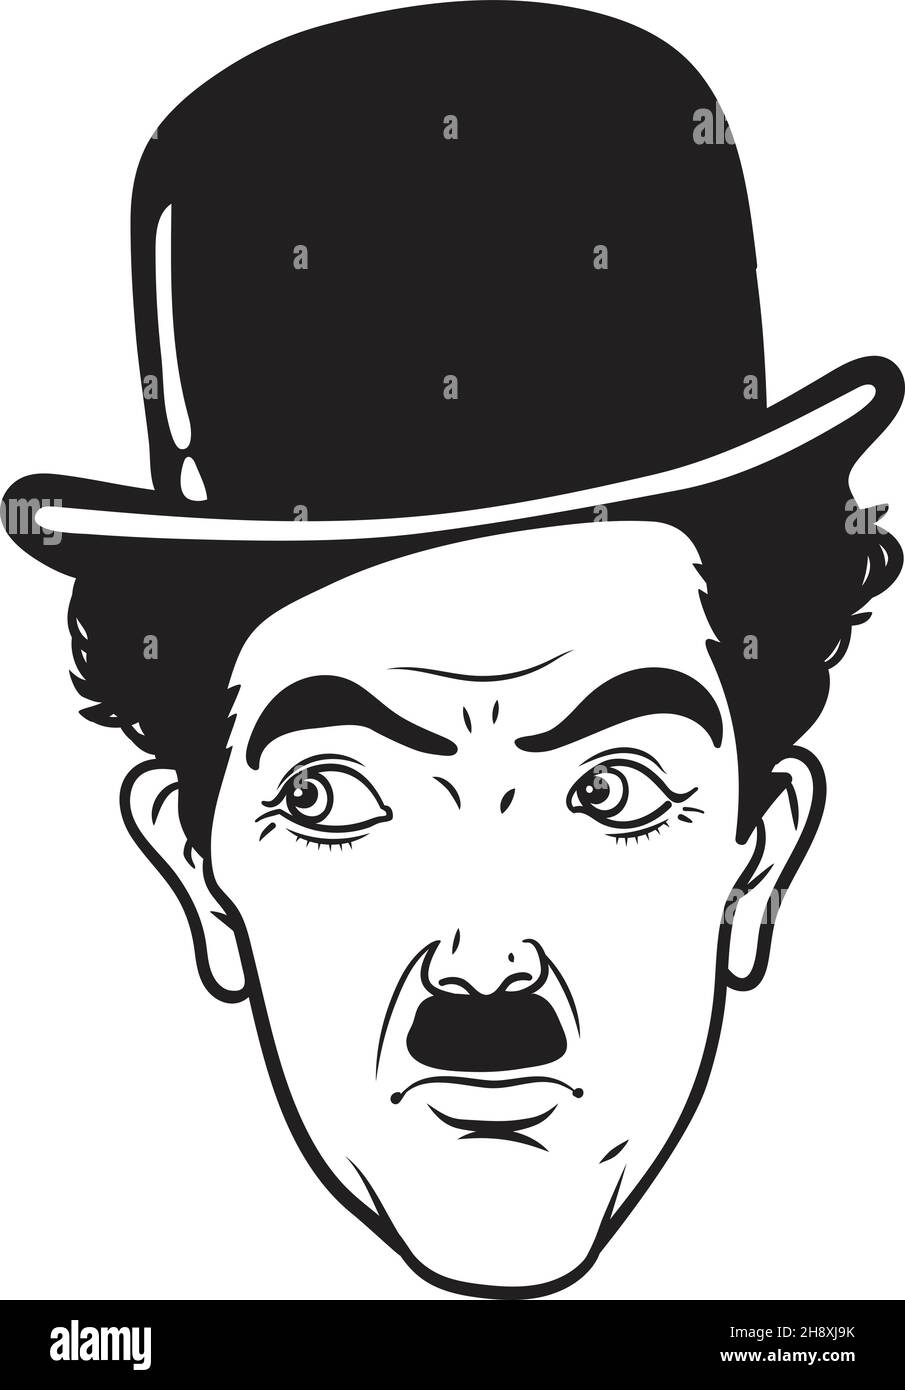 Charlie Chaplin portrait in line art vector. He was an English comic actor, film maker and composer who rose the fame in the era of silent Stock Vector